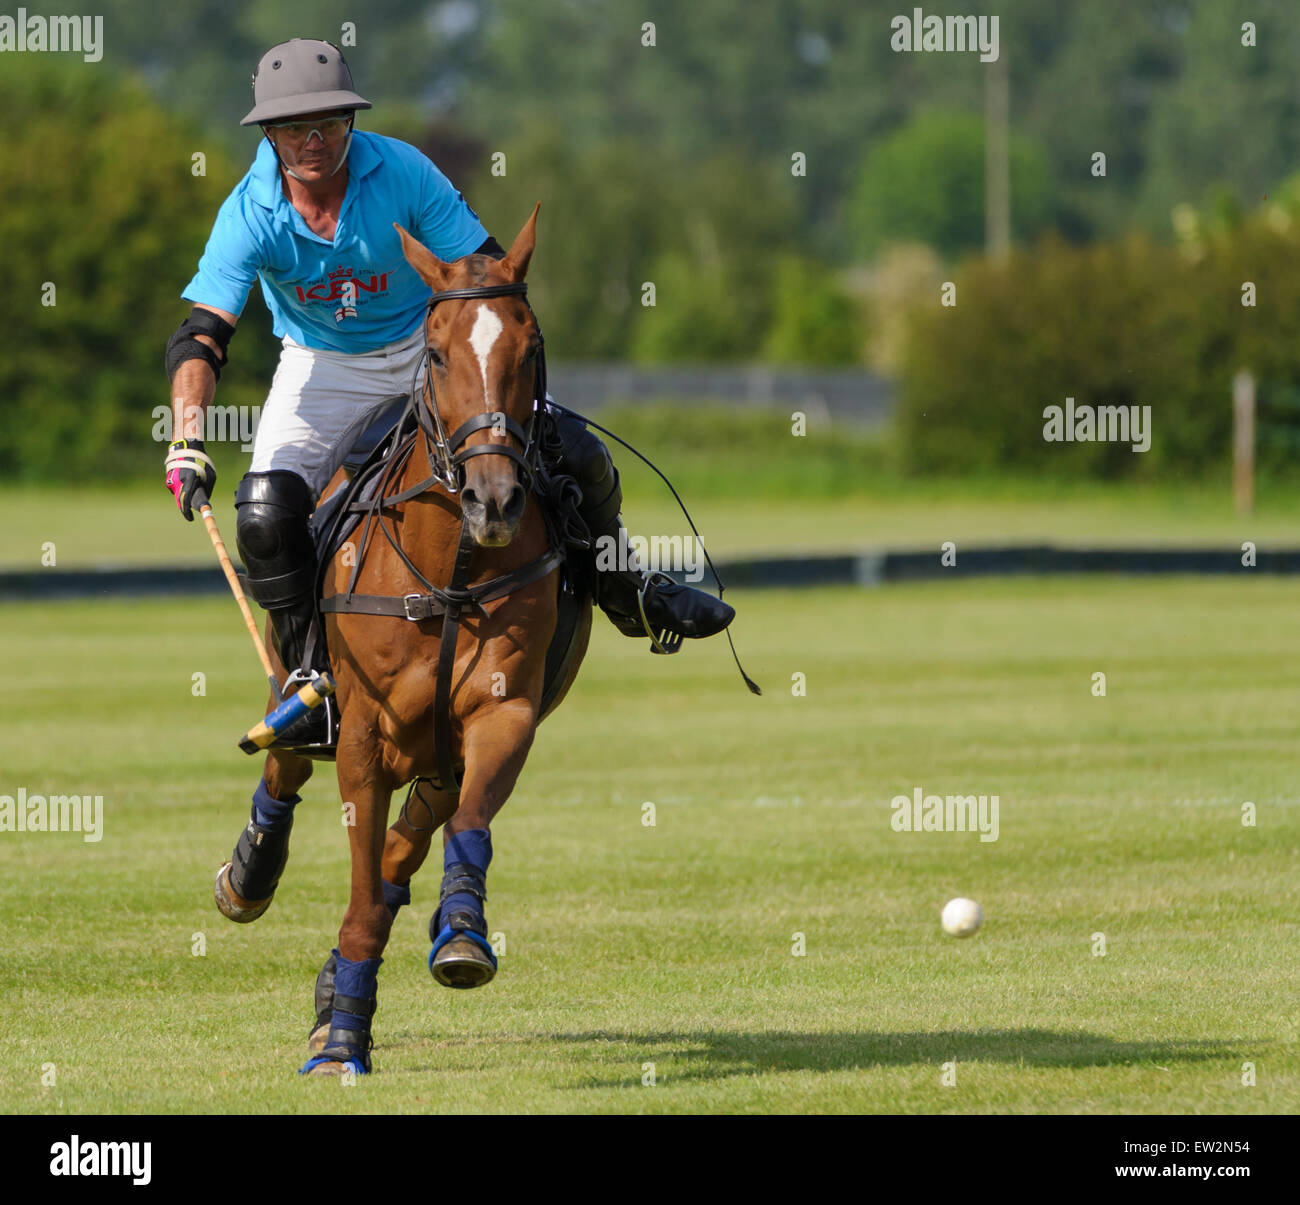 Rutland Polo Club, Oakham,16th June 2015. Fabio Lavinia drives the ball while playing for Rathbeags vs. Print On Demand during the league matches for the Assam Cup. Stock Photo